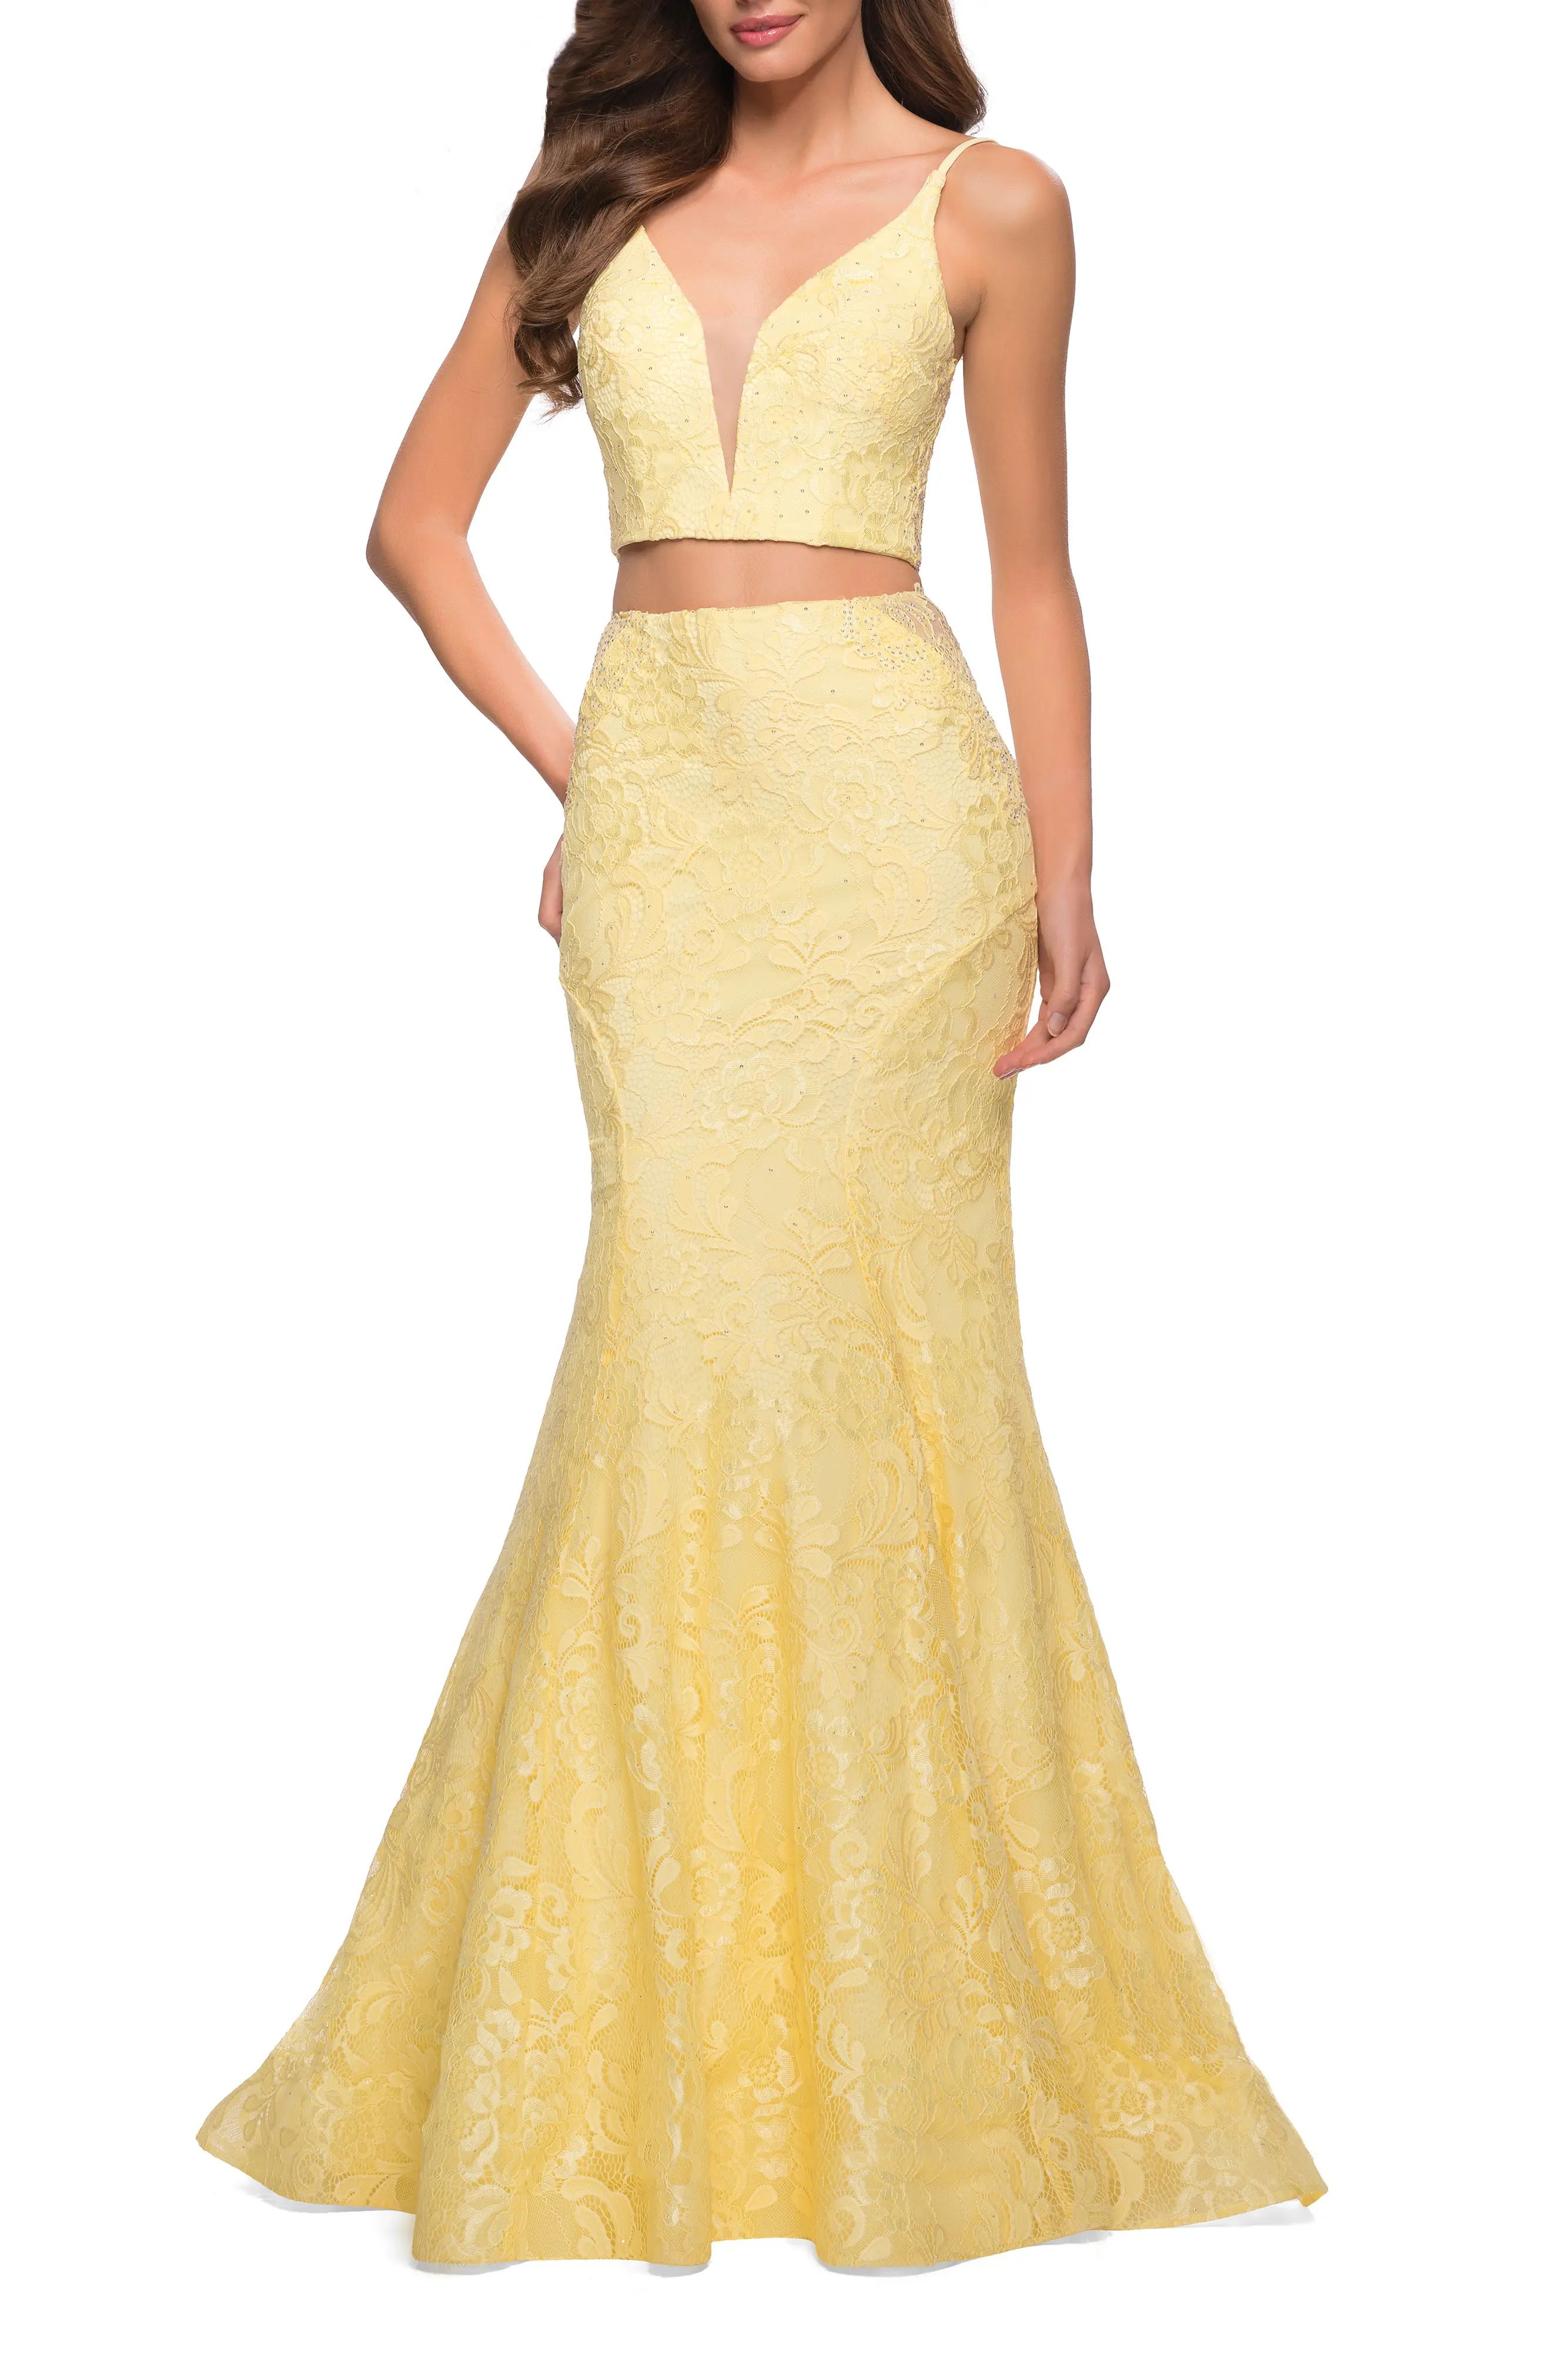 La Femme Stretch Lace Two-Piece Mermaid Gown in Pale Yellow at Nordstrom, Size 6 | Nordstrom